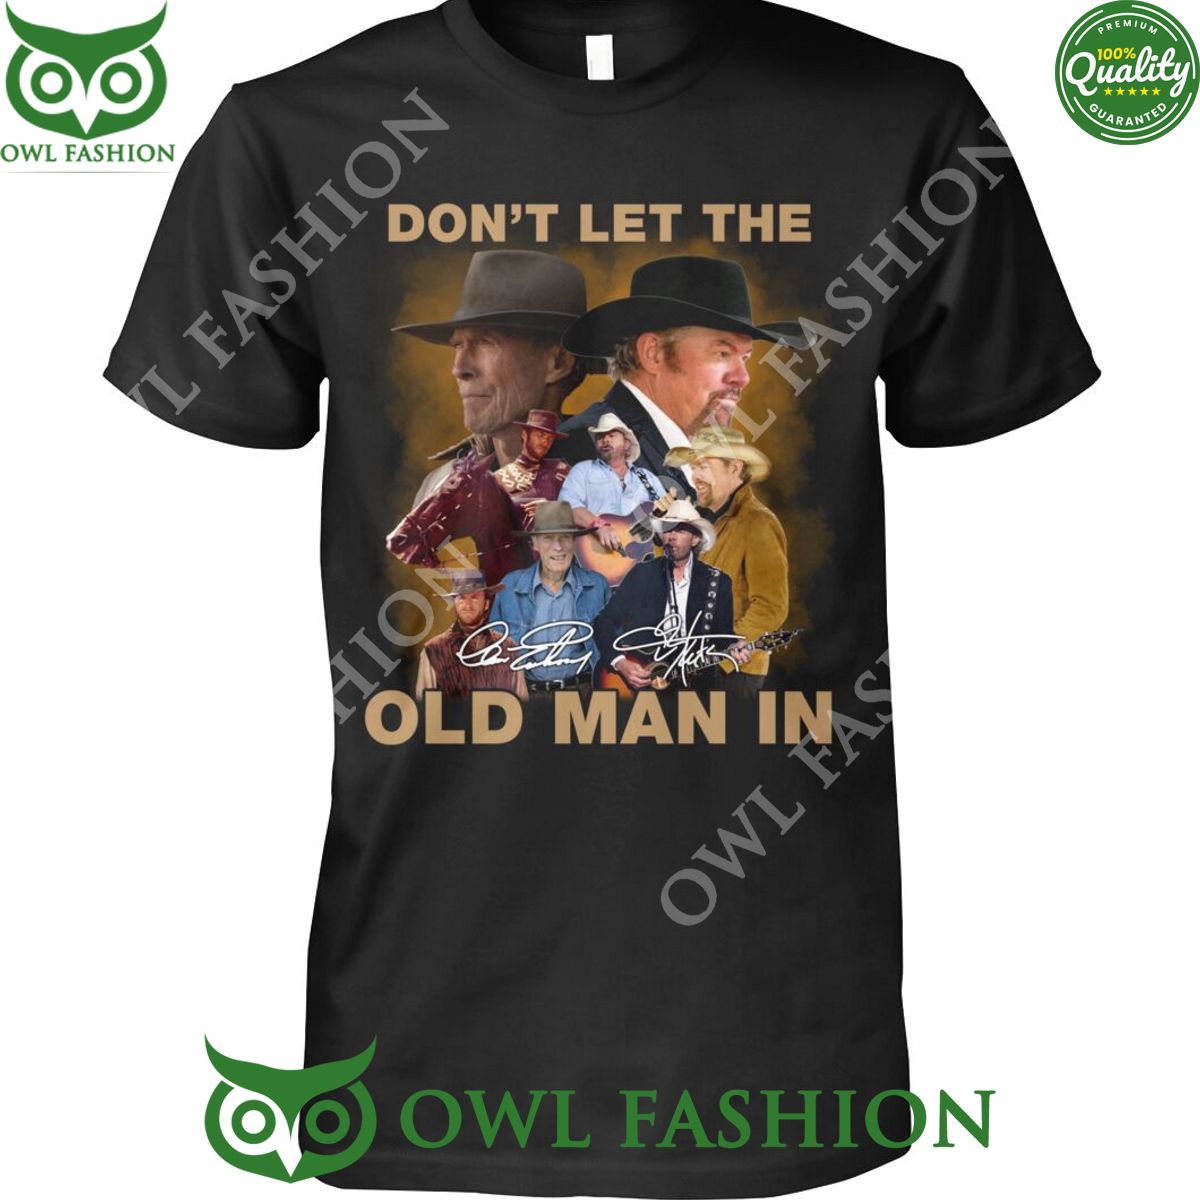 famous song dont let me old man in toby keith t shirt 1 0oJkm.jpg